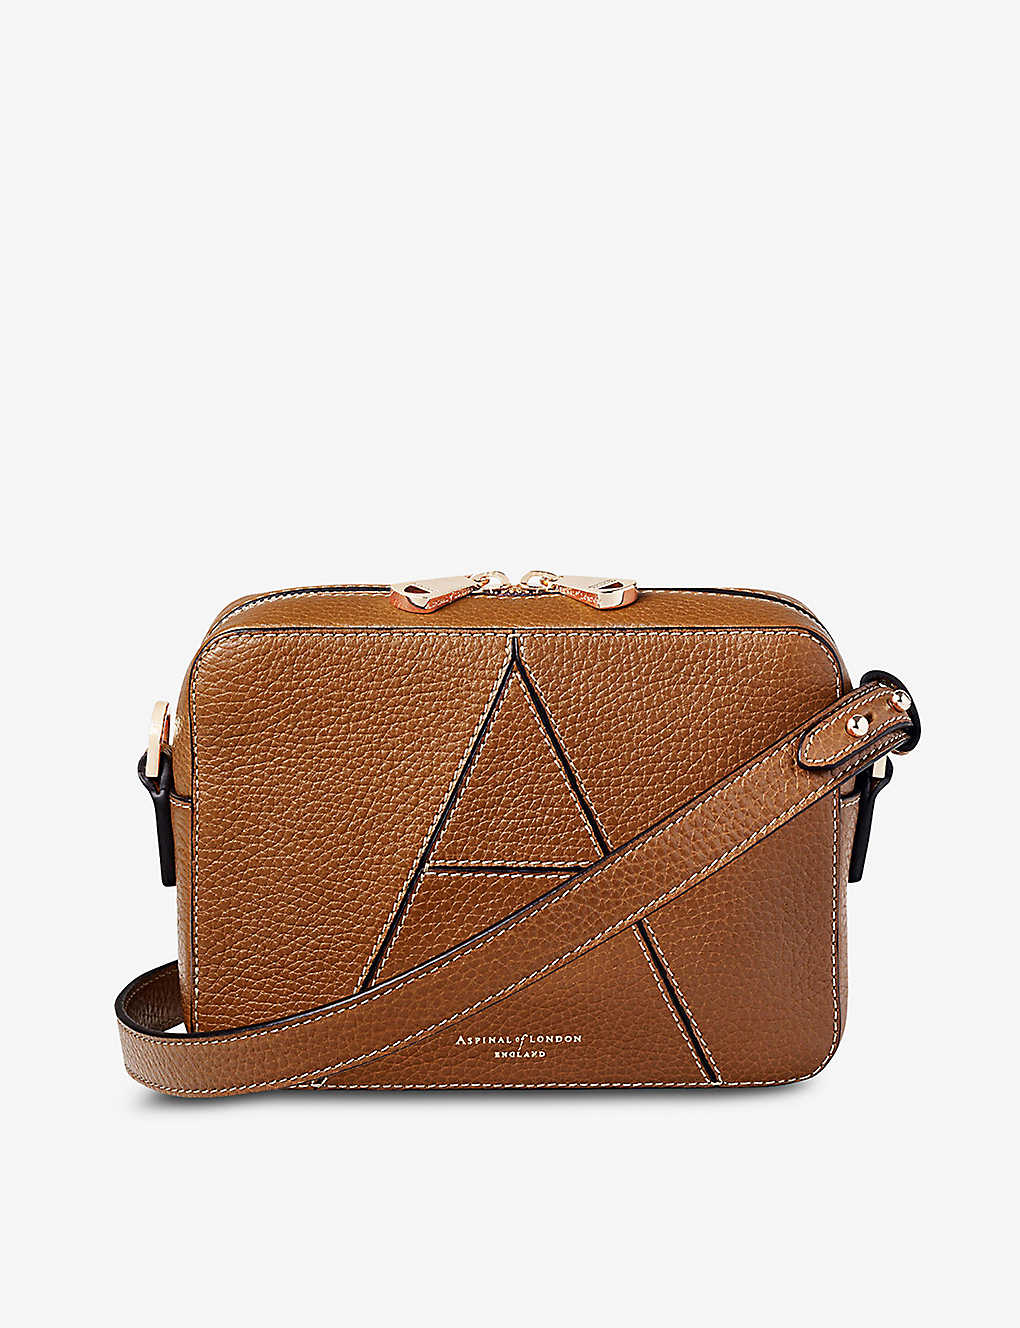 Aspinal Of London Womens Tan Camera A Leather Cross-body Bag